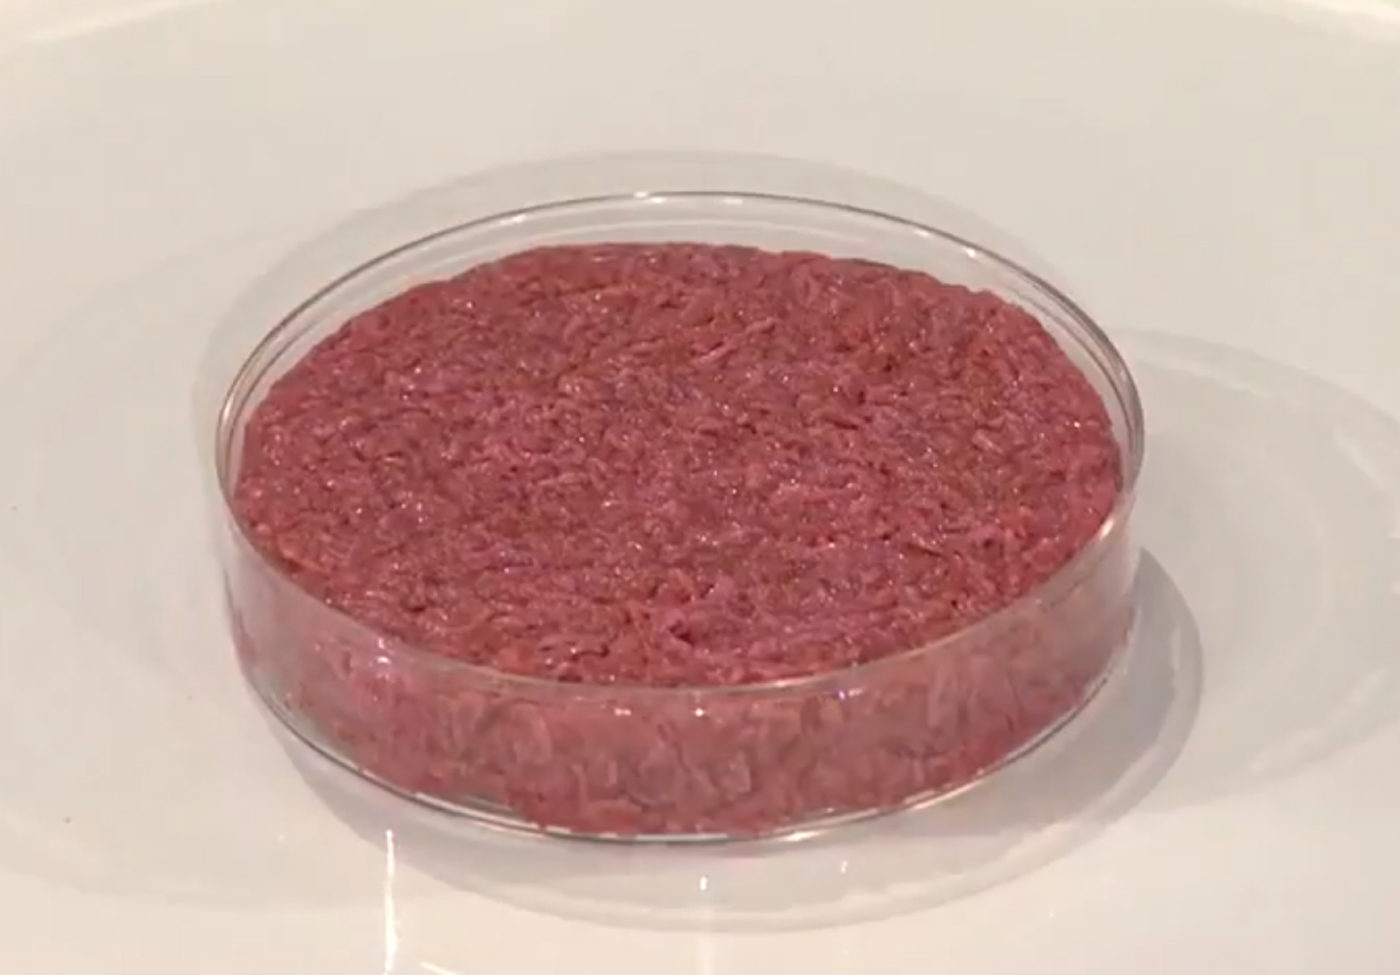 Photo of the world's first cultured hamburger (yet unbaked here), presented at a news conference in London on 5 August 2013. Credit: World Economic Forum via Wikimedia Commons.